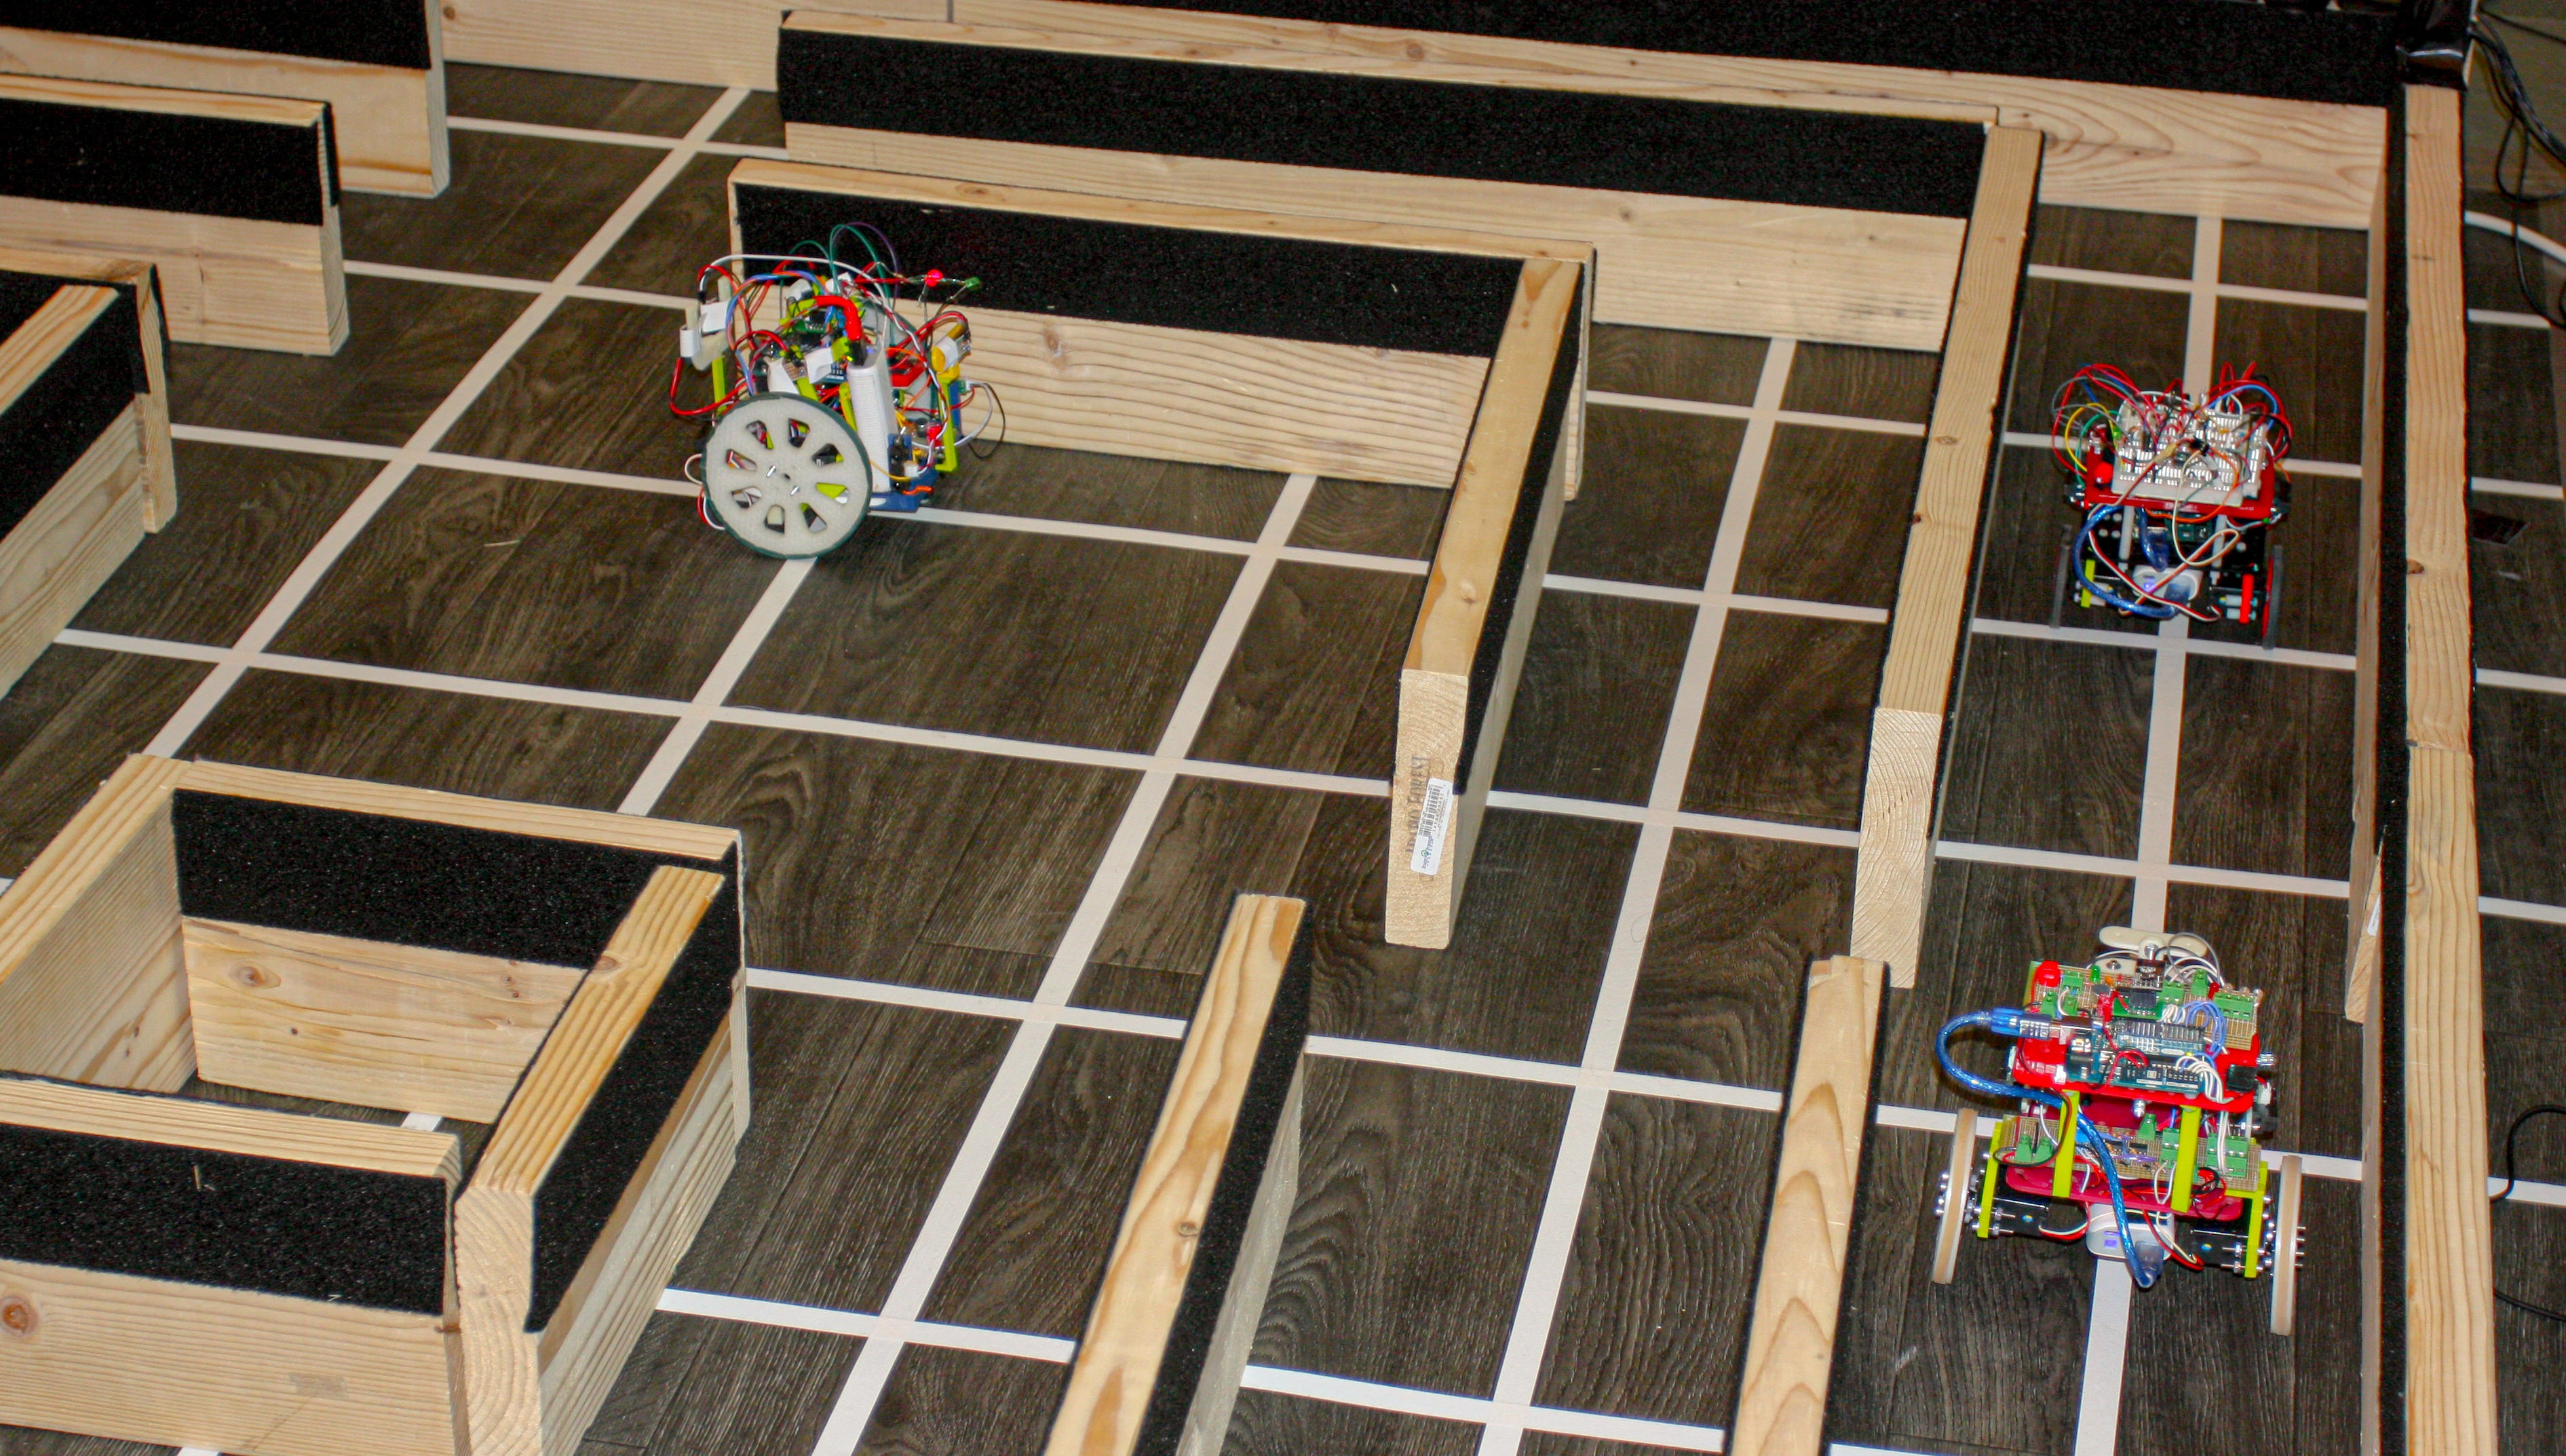 Robots created by ECE students